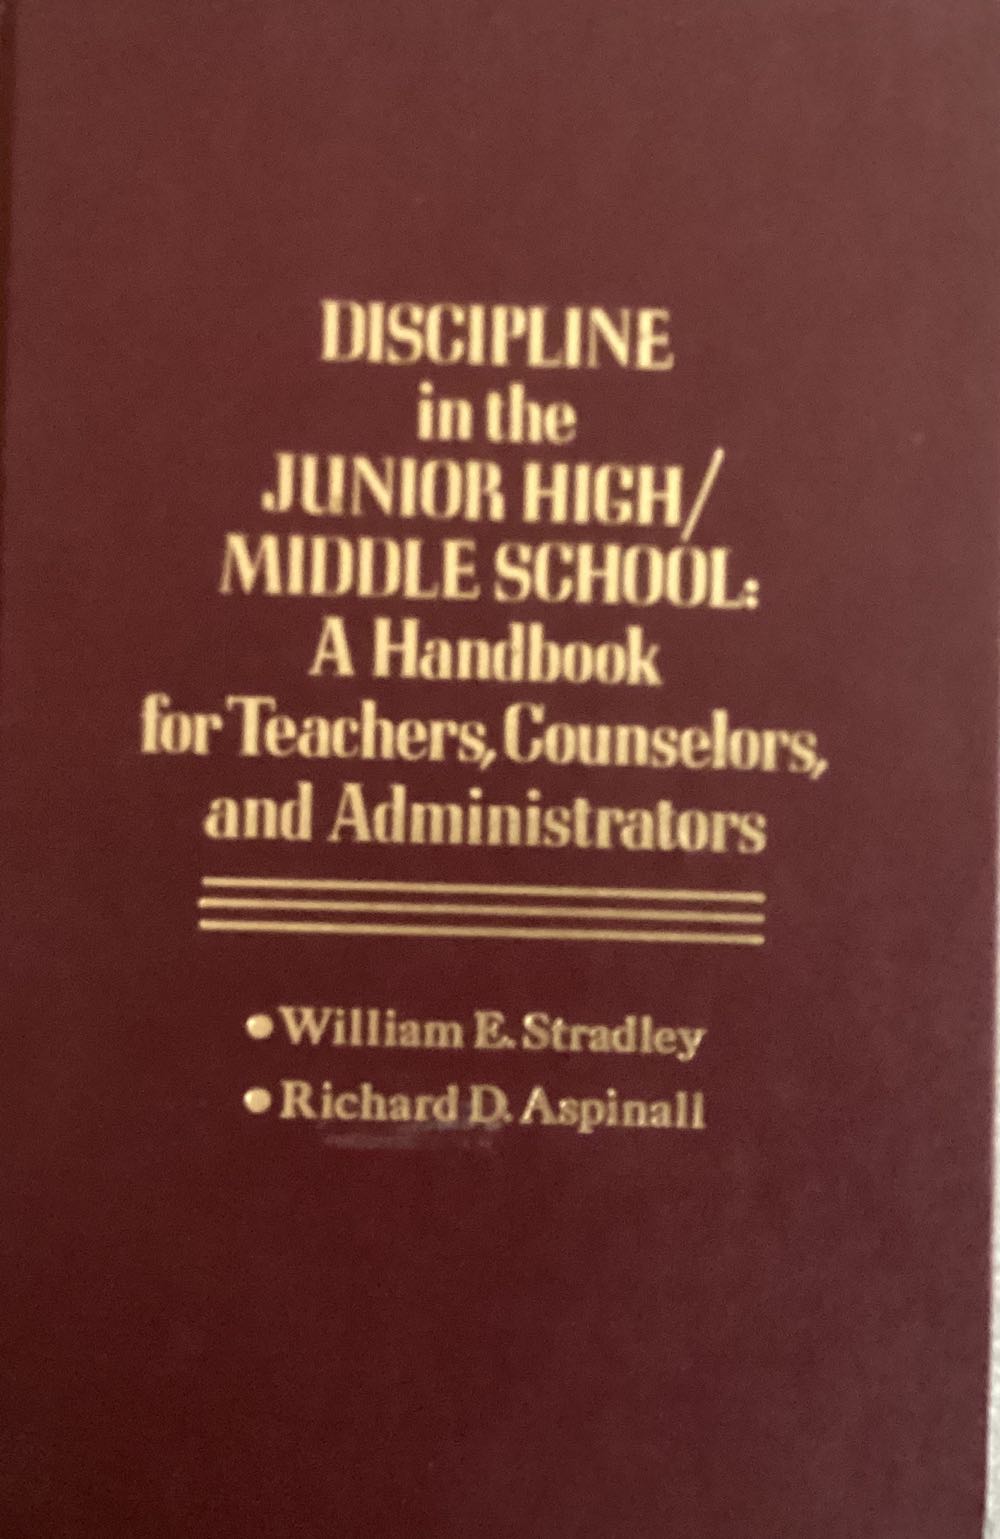 Discipline in the junior high/middle school - William E. Stradley book collectible [Barcode 9780876282649] - Main Image 1